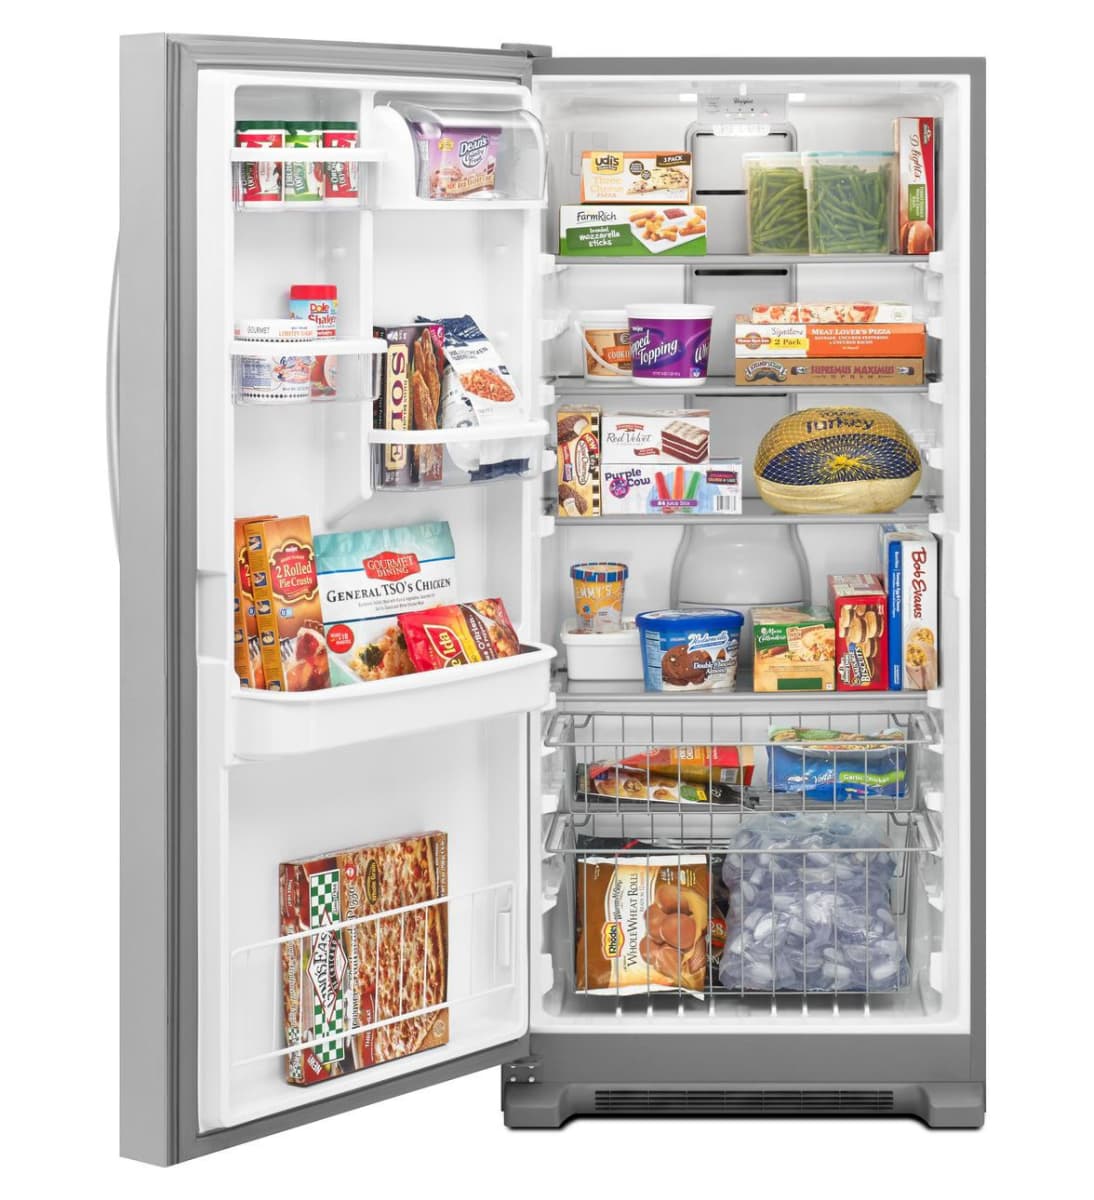 WZF79R20DW Whirlpool 20 cu. ft. Upright Freezer with Temperature Alarm  WHITE - Jetson TV & Appliance